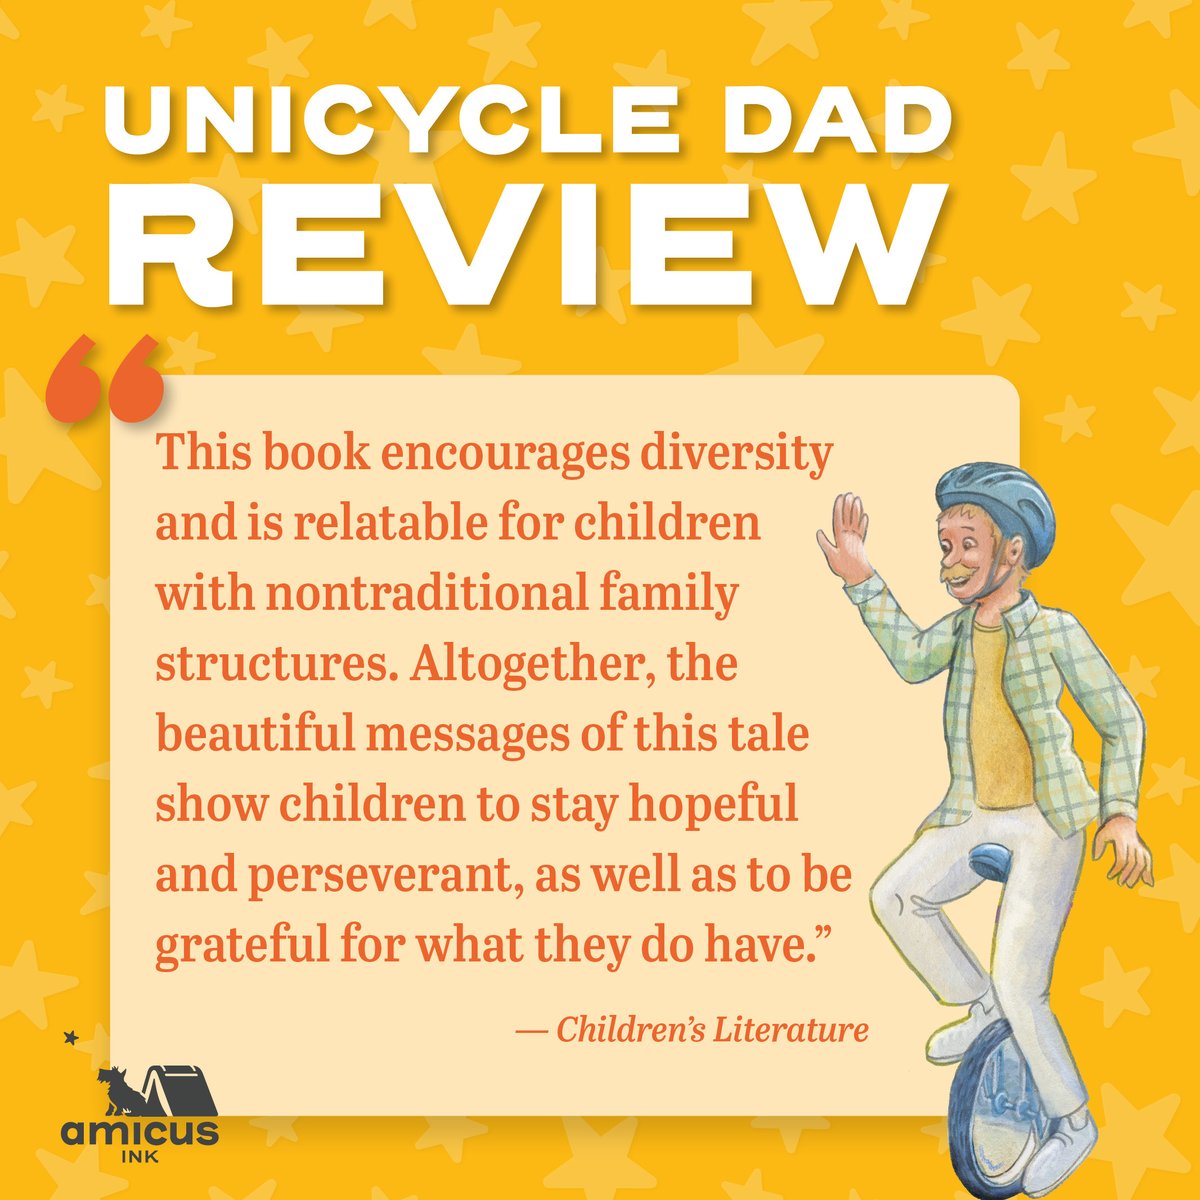 Have you seen our newly released picture book? Unicycle Dad shares the inherent struggles and quiet joys of a single-parent, impoverished household. amicuspublishing.us/products/unicy… #picturebooks #newbooks #singleparent #kidsbooks #Amicus